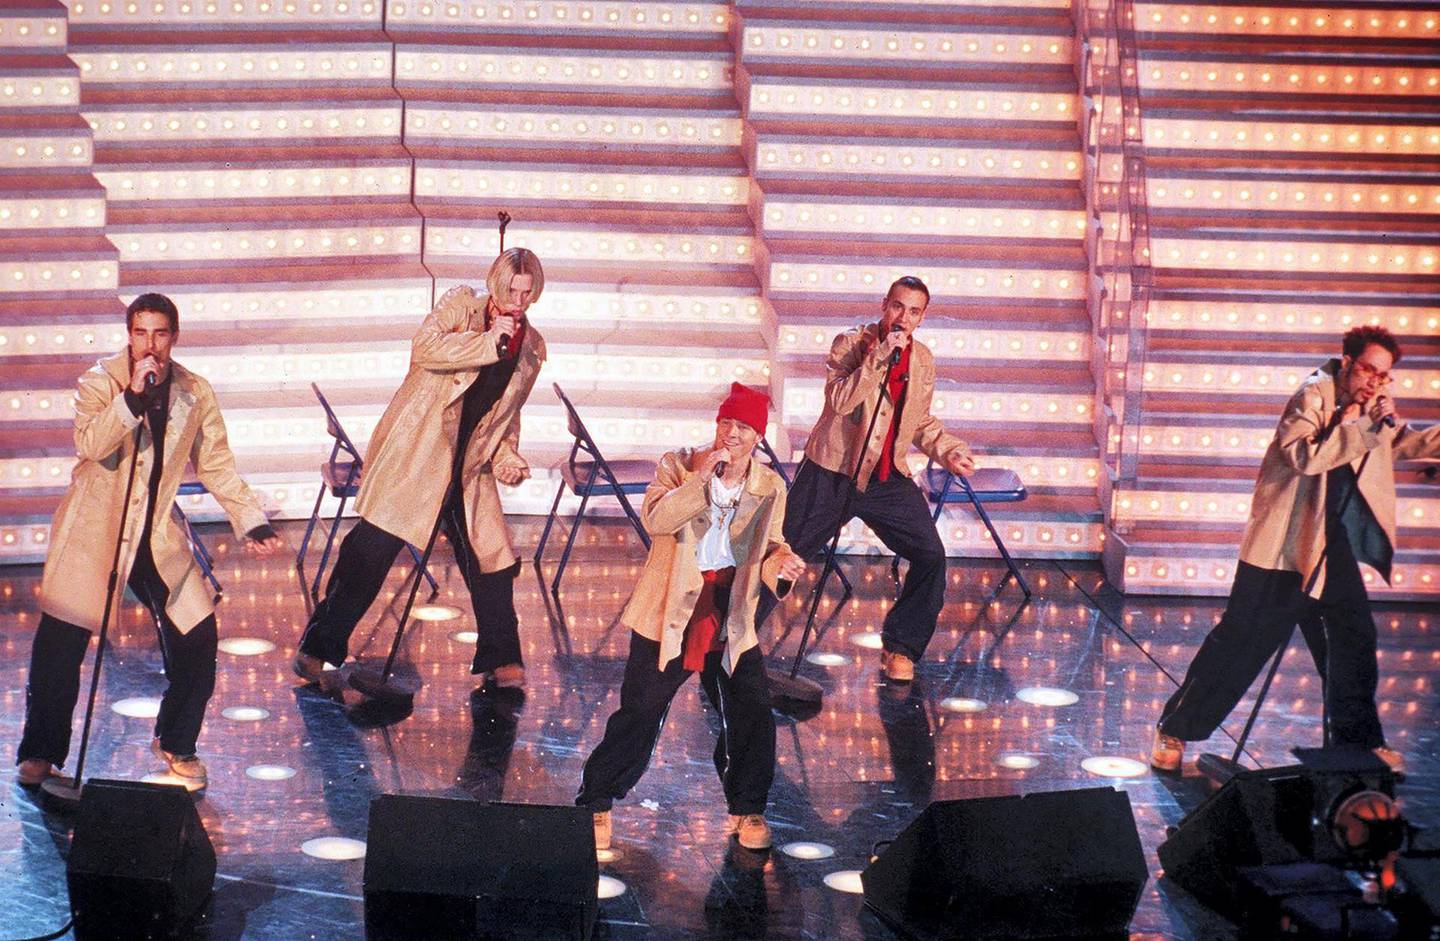 Mandatory Credit: Photo by AGF s.r.l./REX/Shutterstock (285220i)
BACKSTREET BOYS
THE SAN REMO POP FESTIVAL, ITALY - 1998